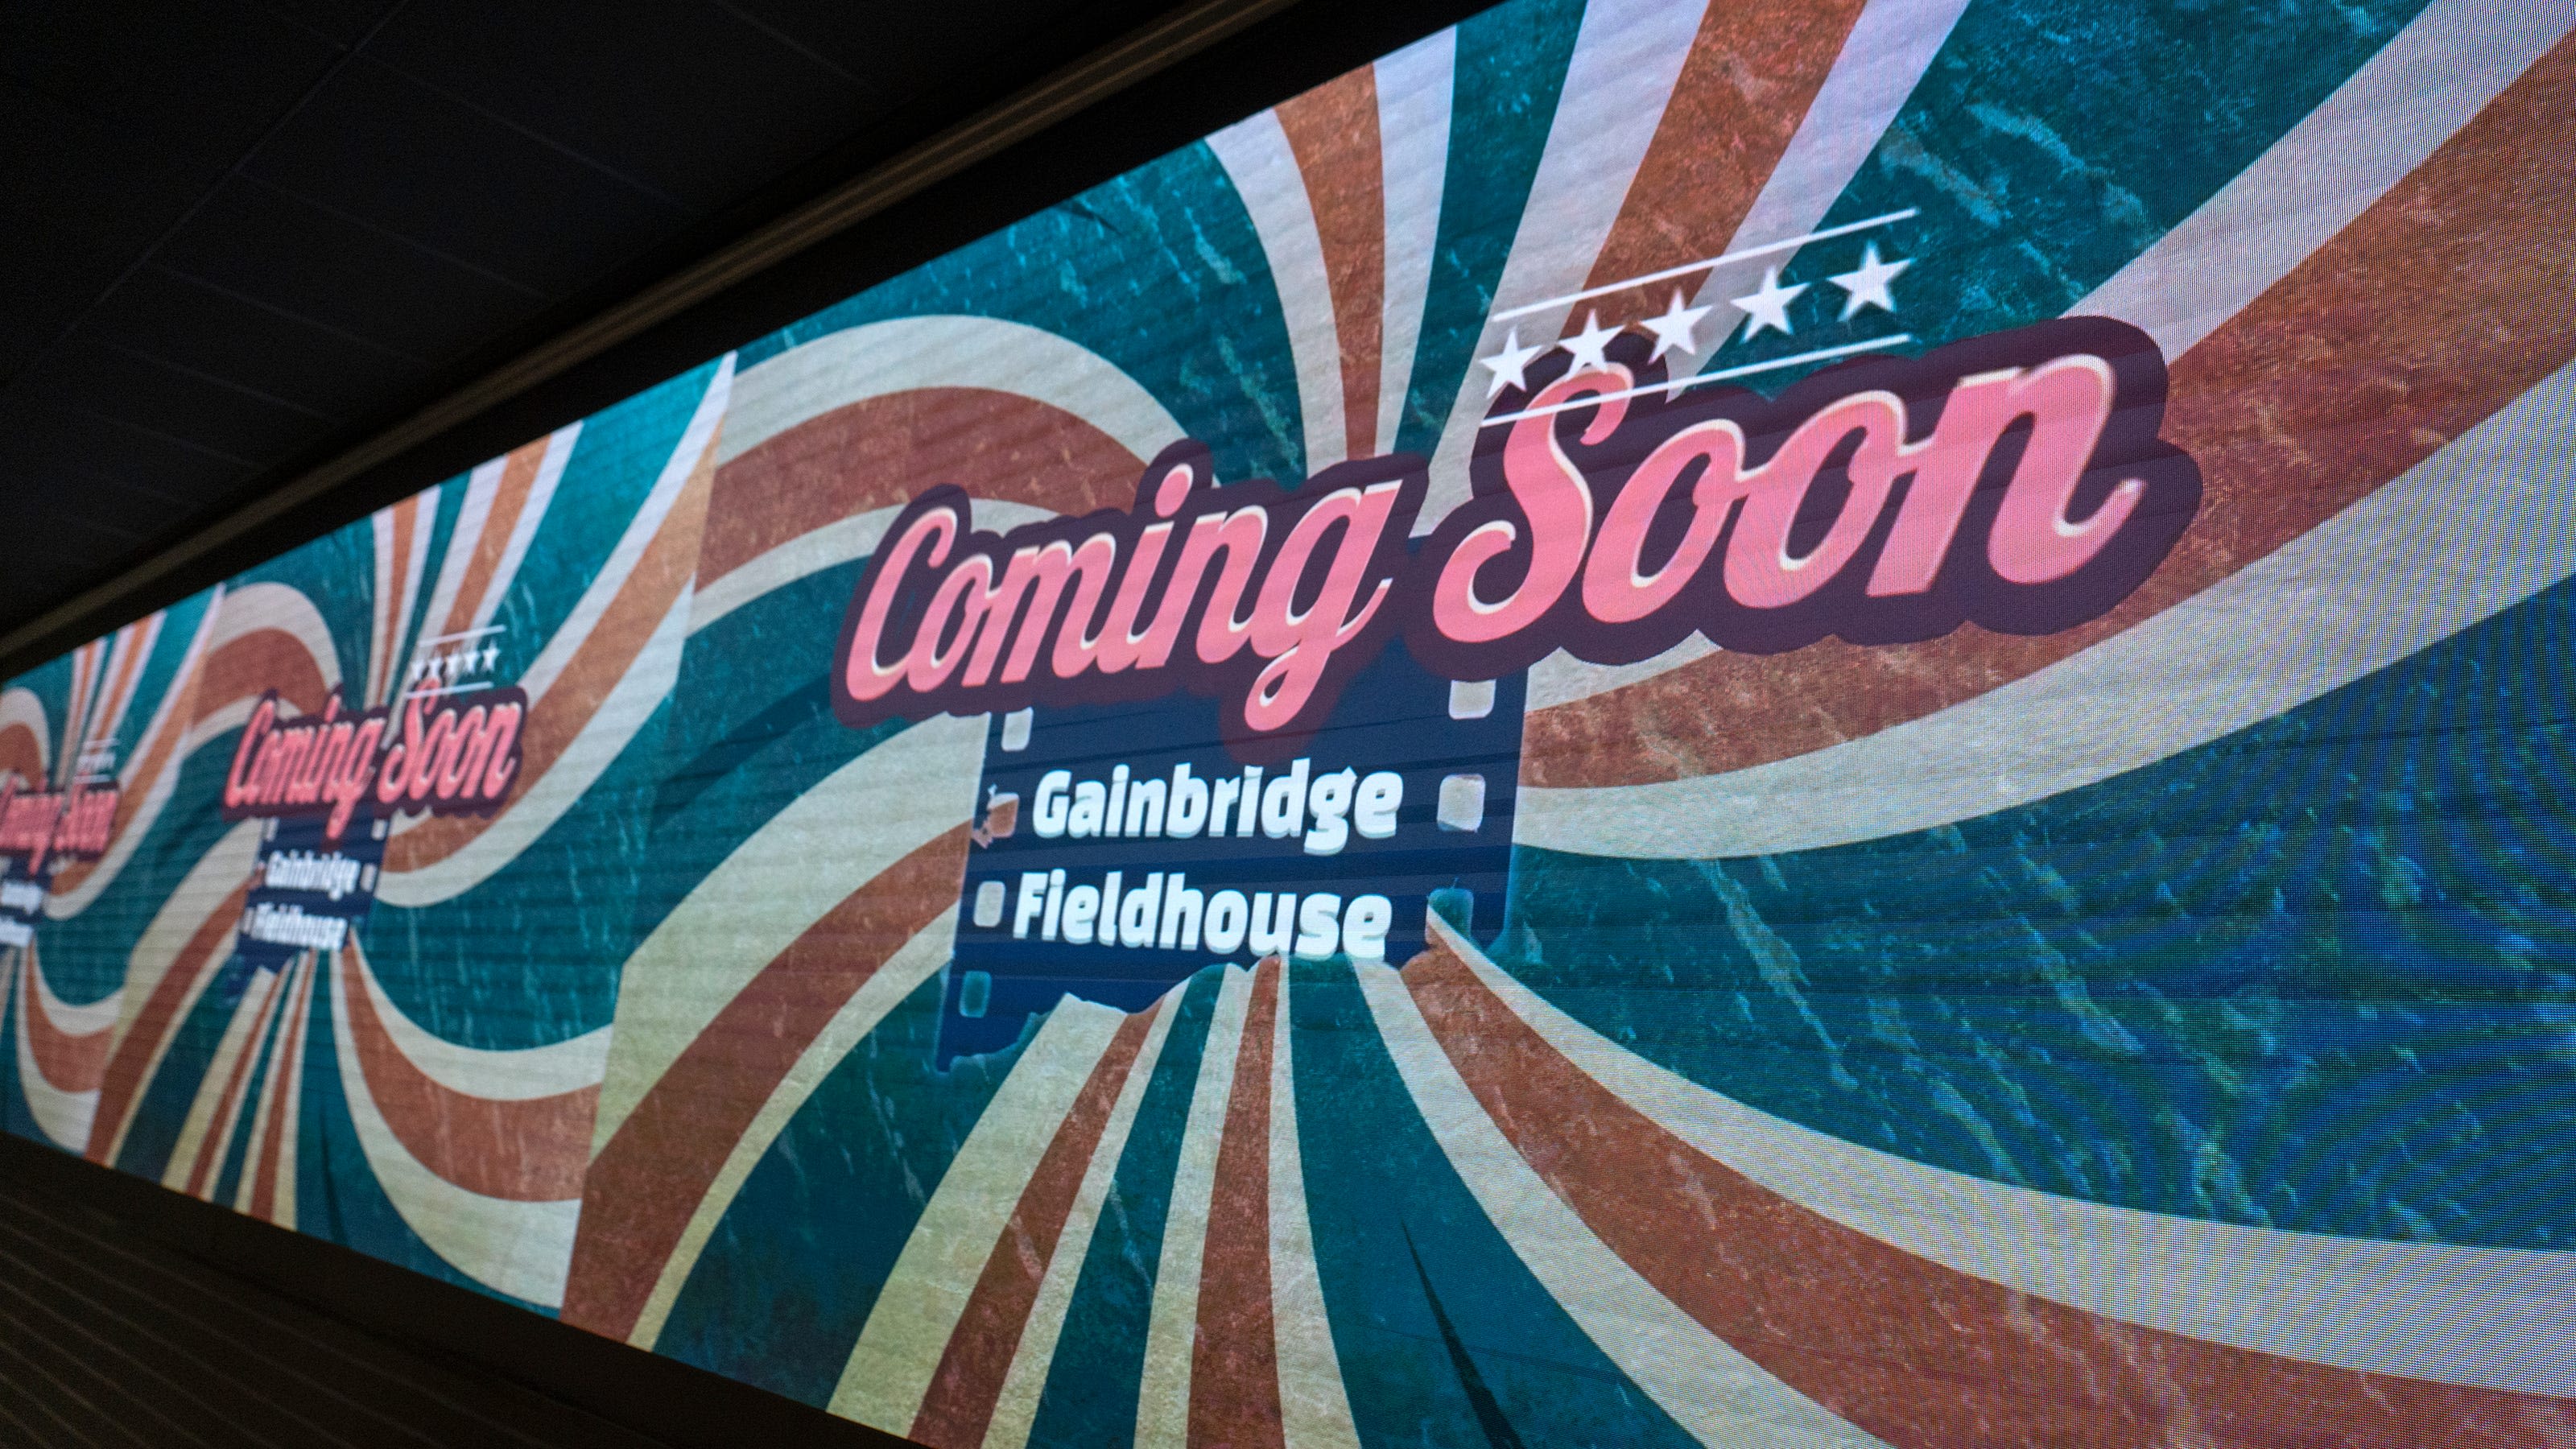 Nicks, Jackson, Manilow: All the acts scheduled for Gainbridge Fieldhouse this summer (so far)